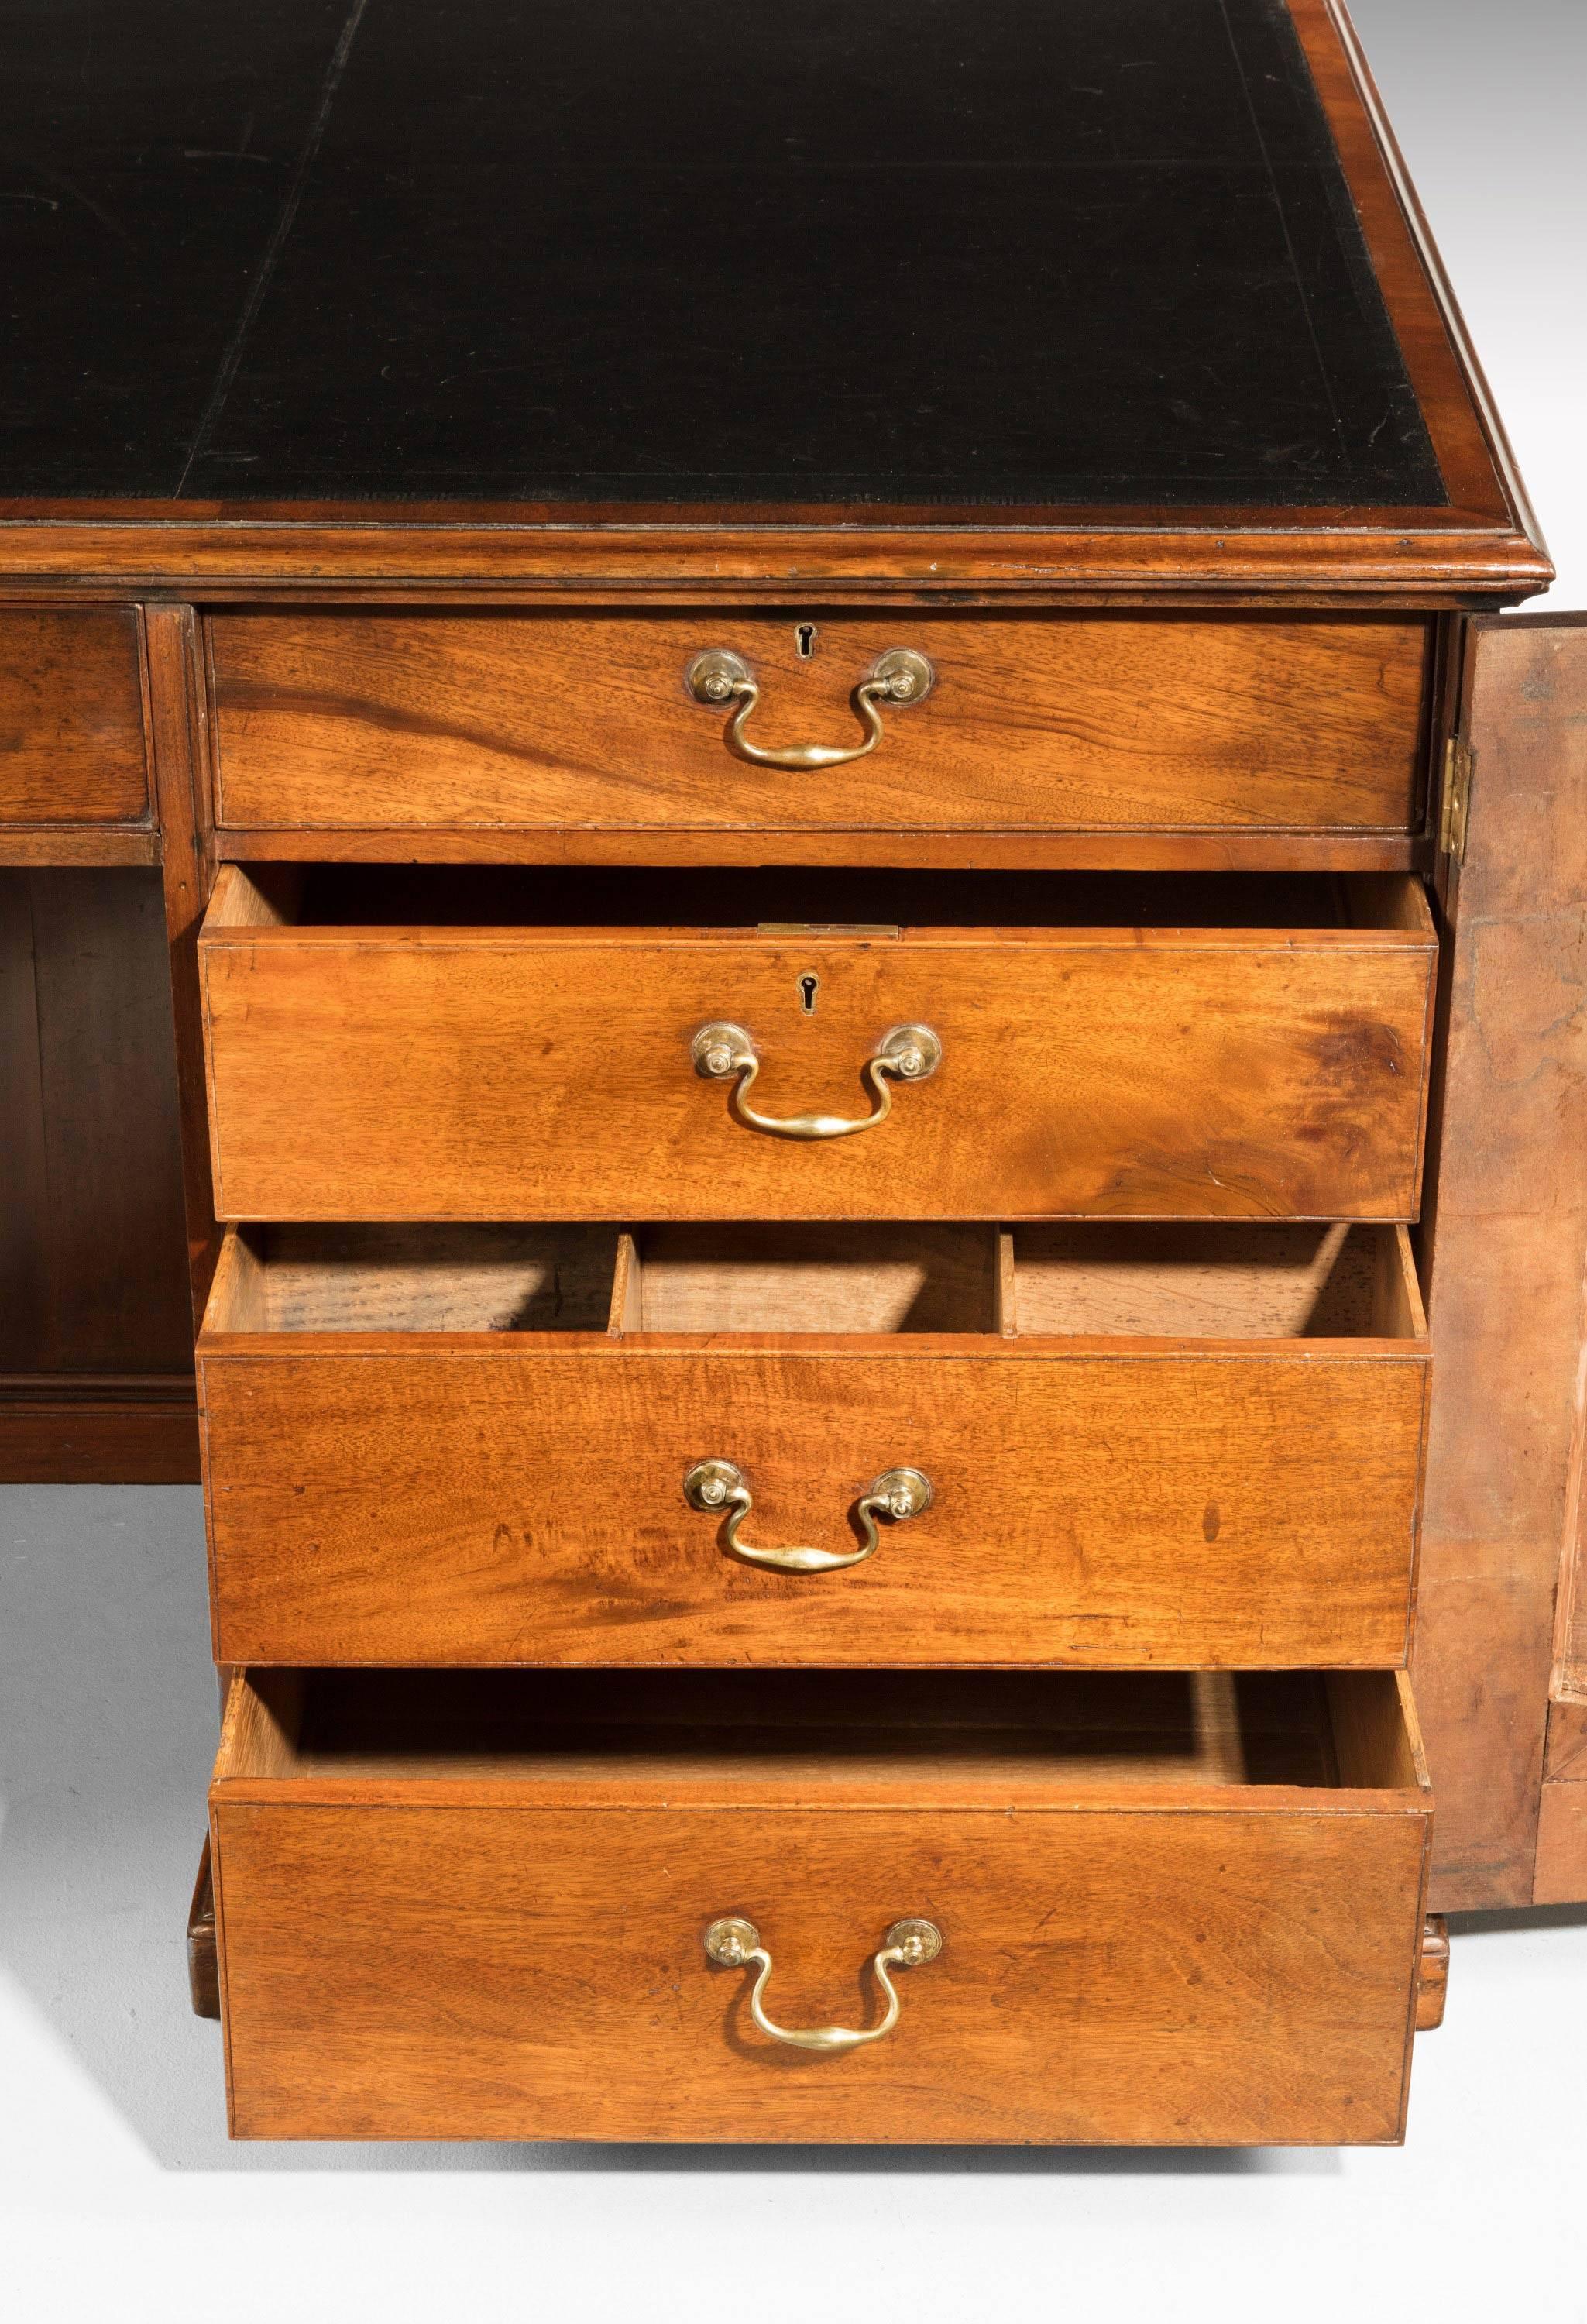 English Chippendale Period Mahogany Desk of Unusual Form with Blind Drawers